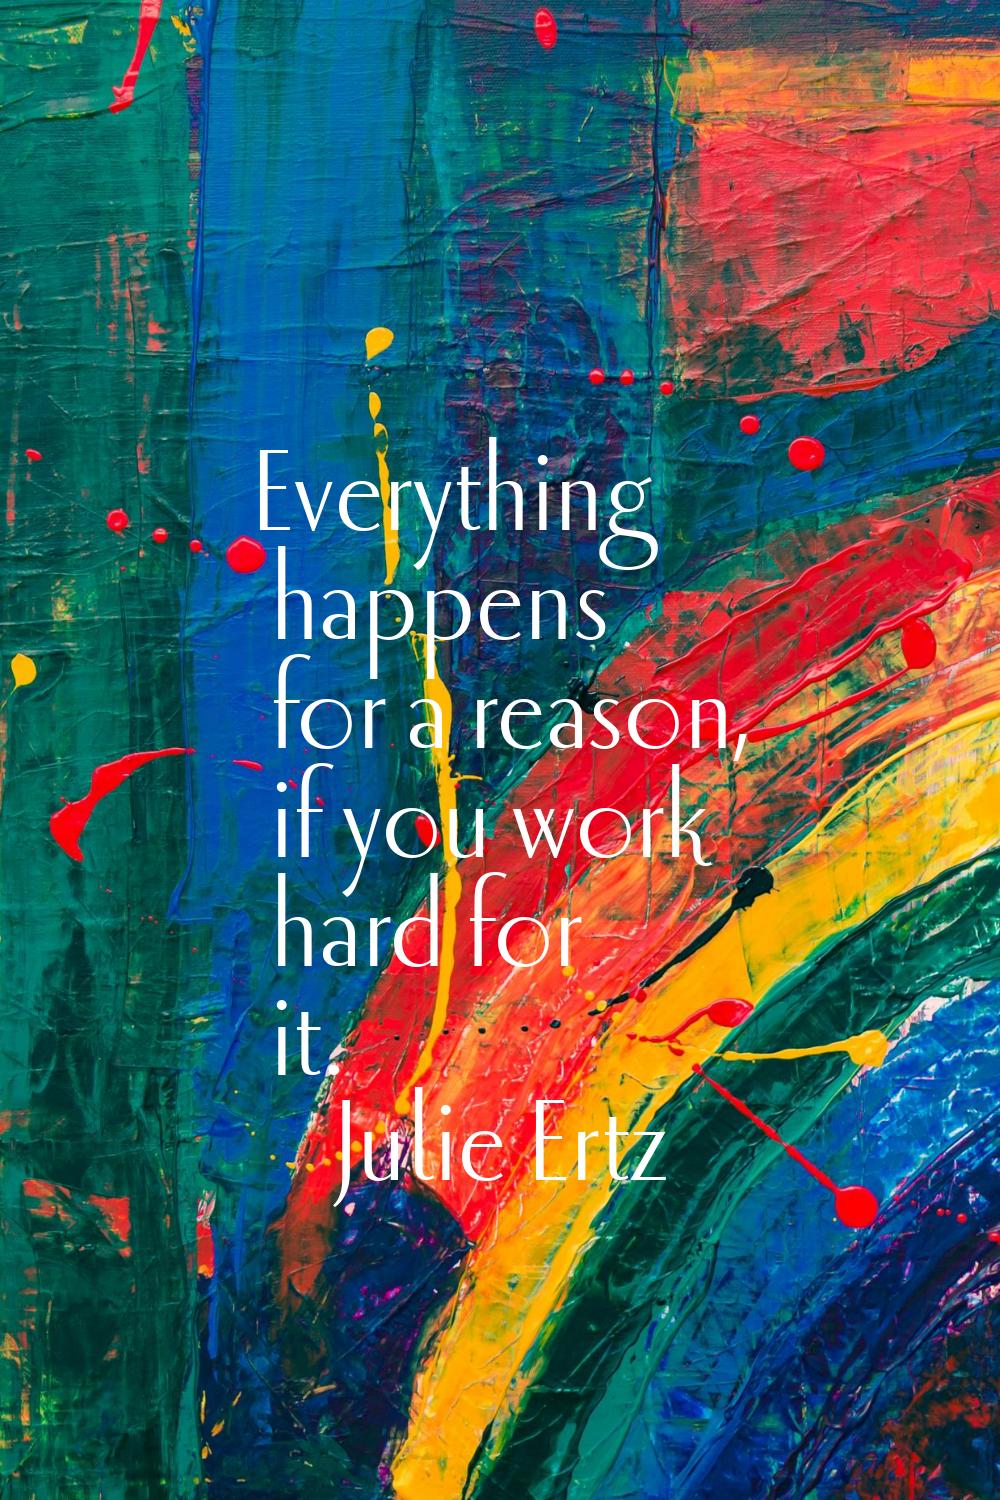 Everything happens for a reason, if you work hard for it.